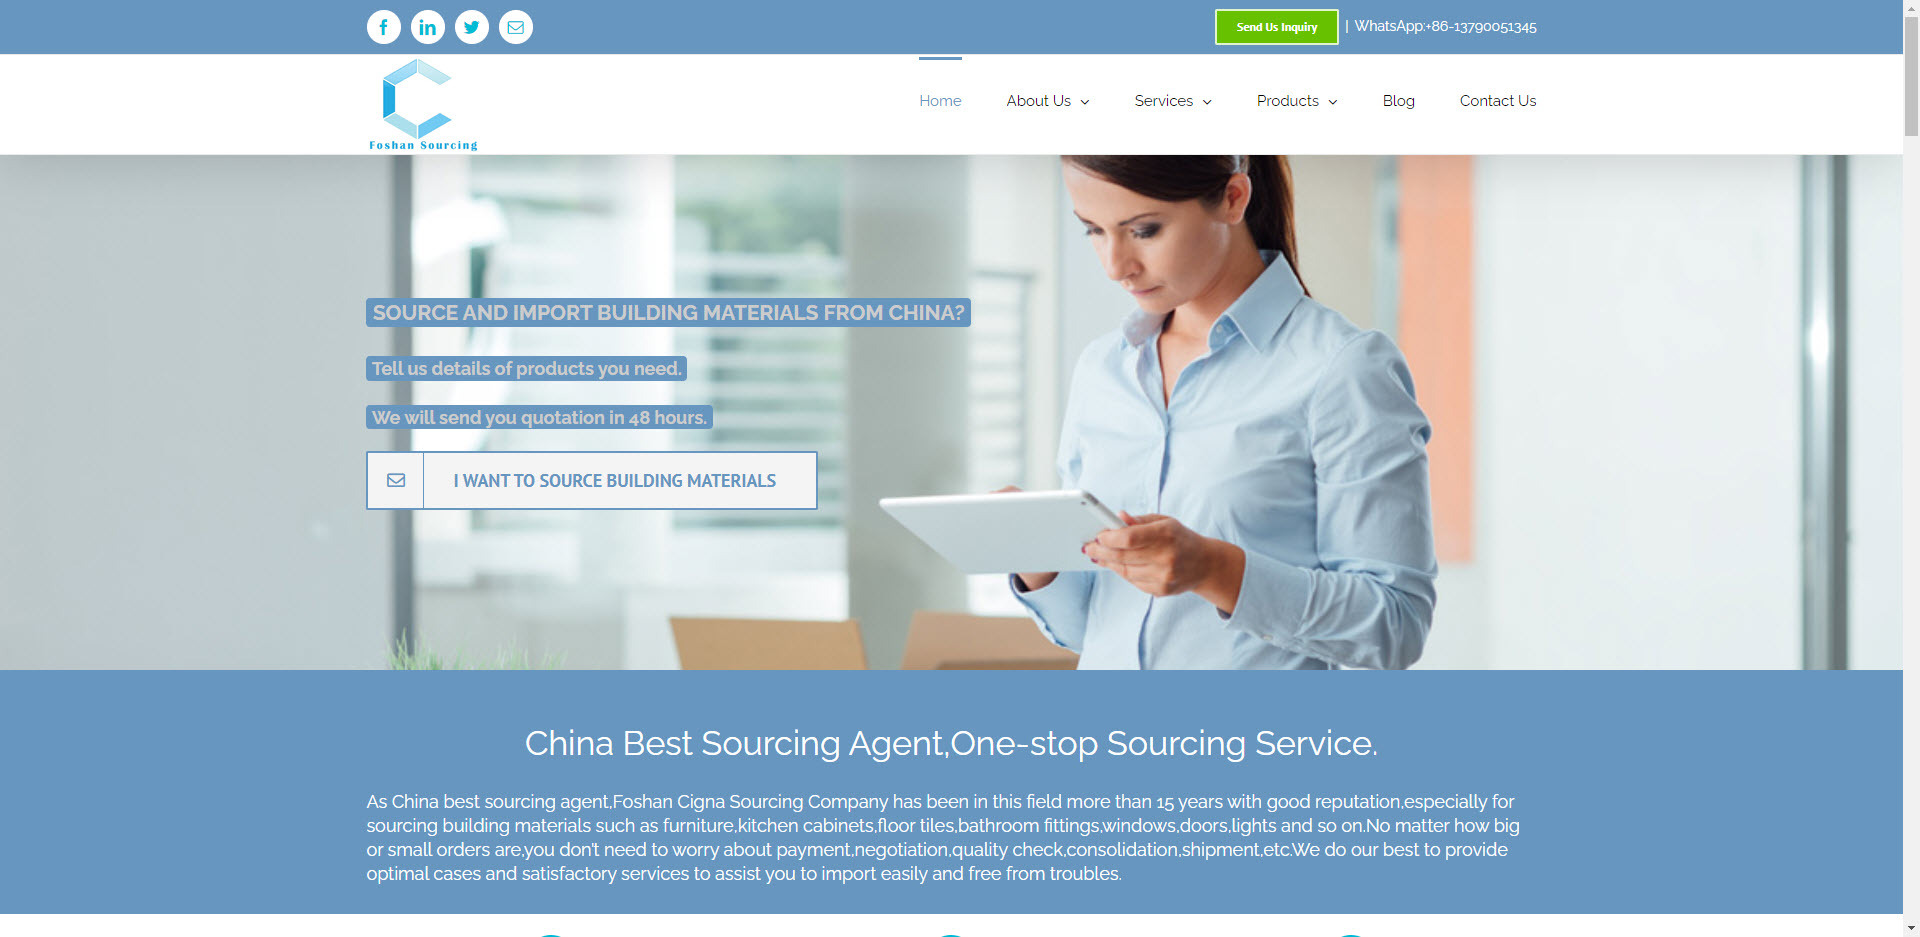 Website Home Page of Foshan Sourcing